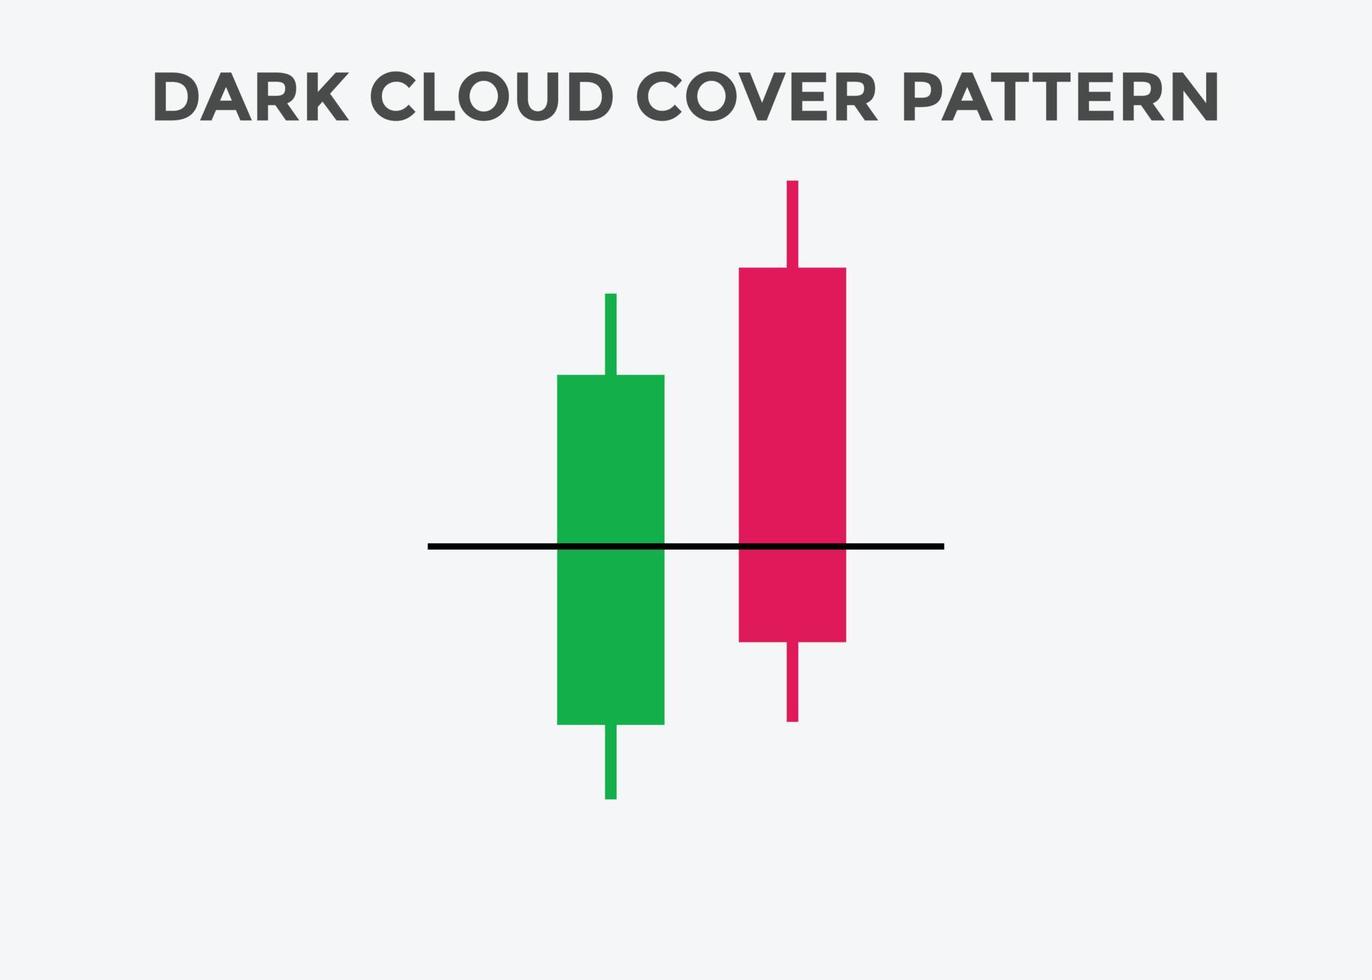 Dark cloud candlestick chart  pattern. Japanese candlesticks pattern. Powerful bearish Candlestick chart for forex, stock, cryptocurrency. Trading signal vector